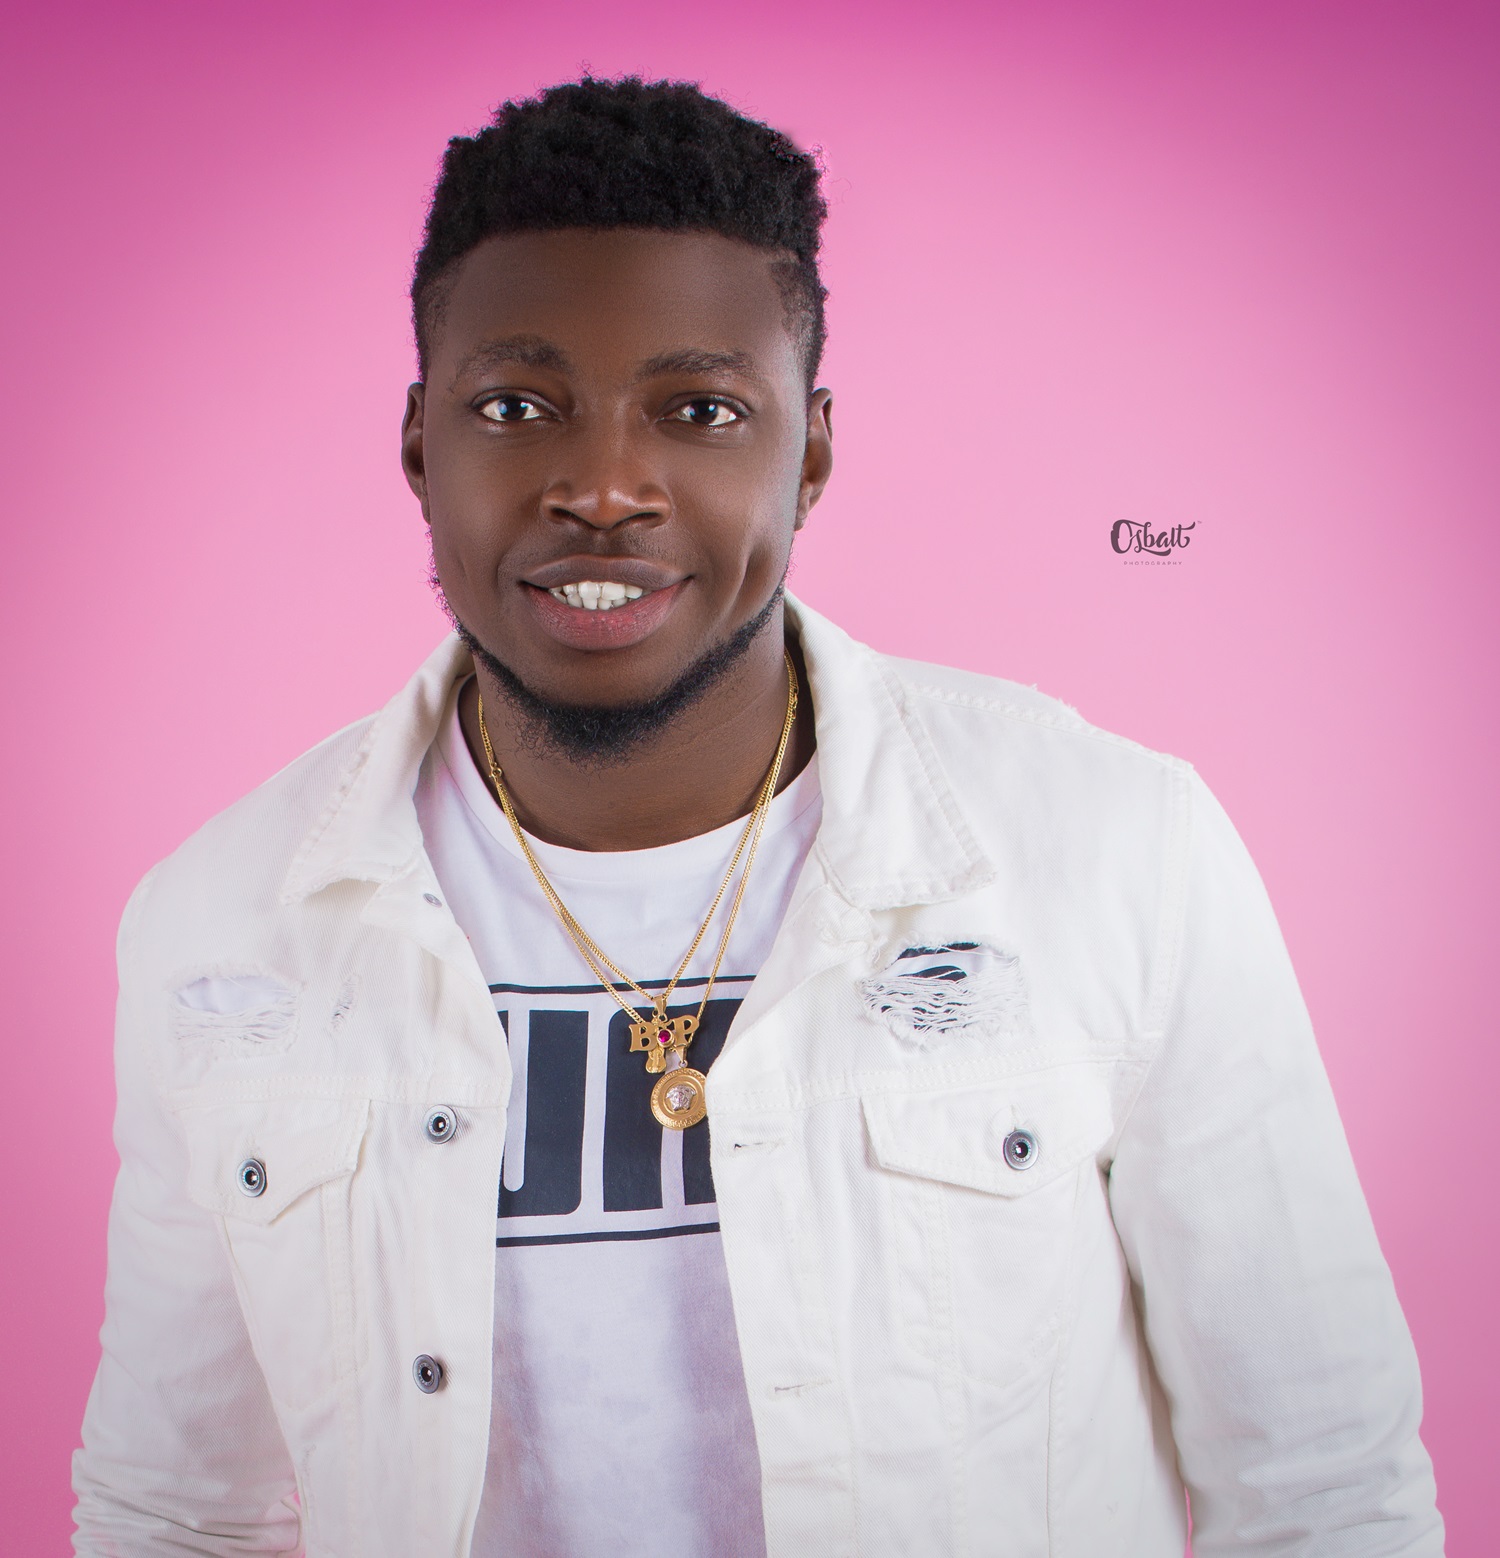 Multi Talented & Next Rated Nigerian Afrobeats singer “B-POSITIVE” releases crispy new hot photos